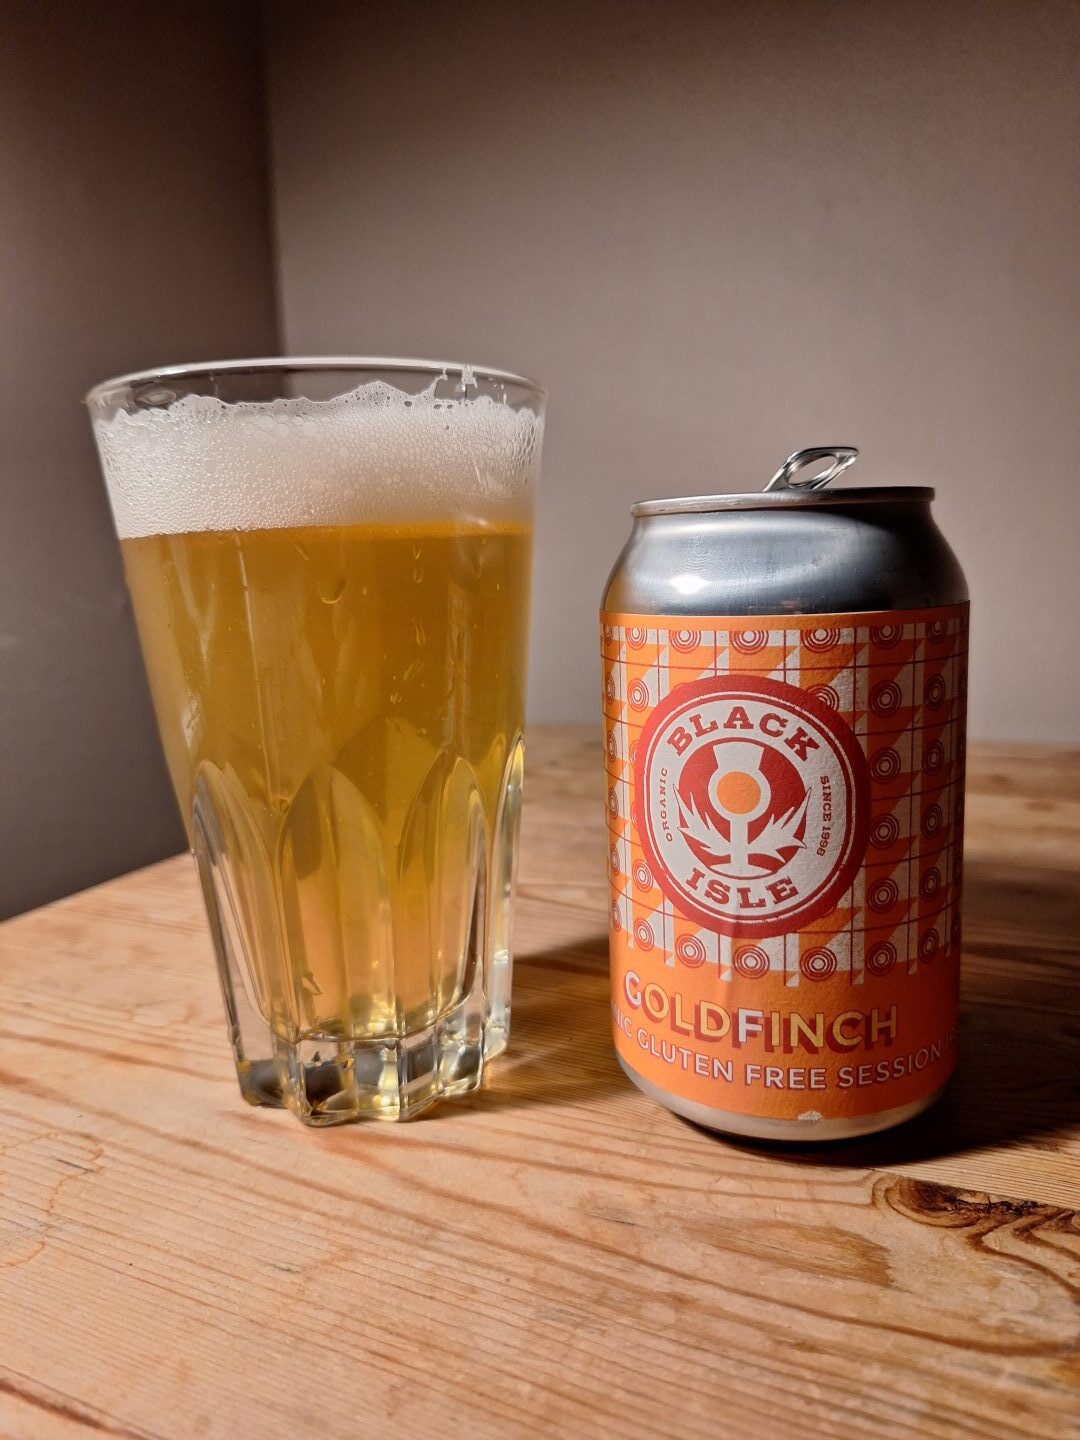 Goldfinch, a gluten free session IPA from Black Isle, poured into a glass. 